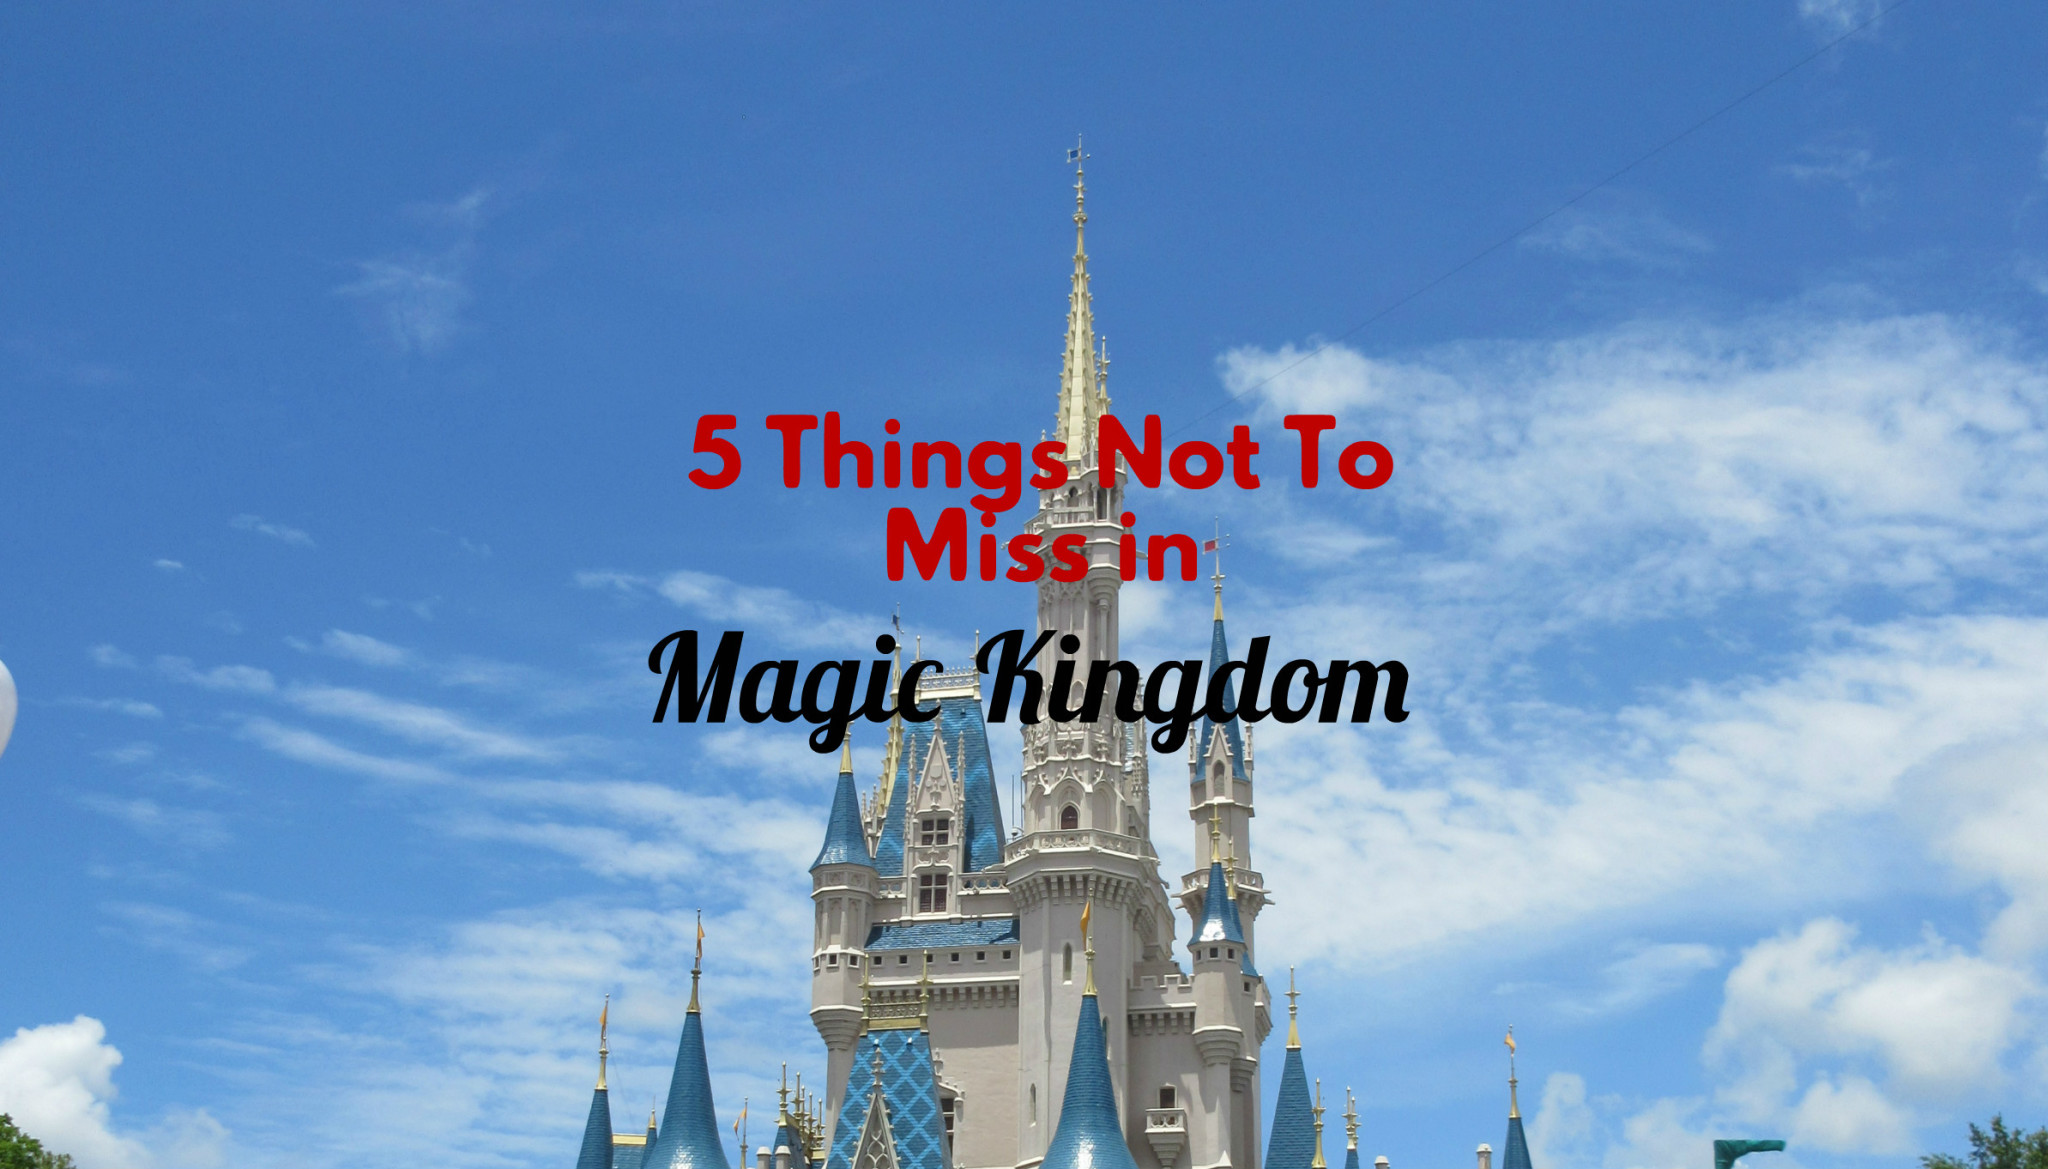 Top 5 Things You Won’t Want To Miss in the Magic Kingdom